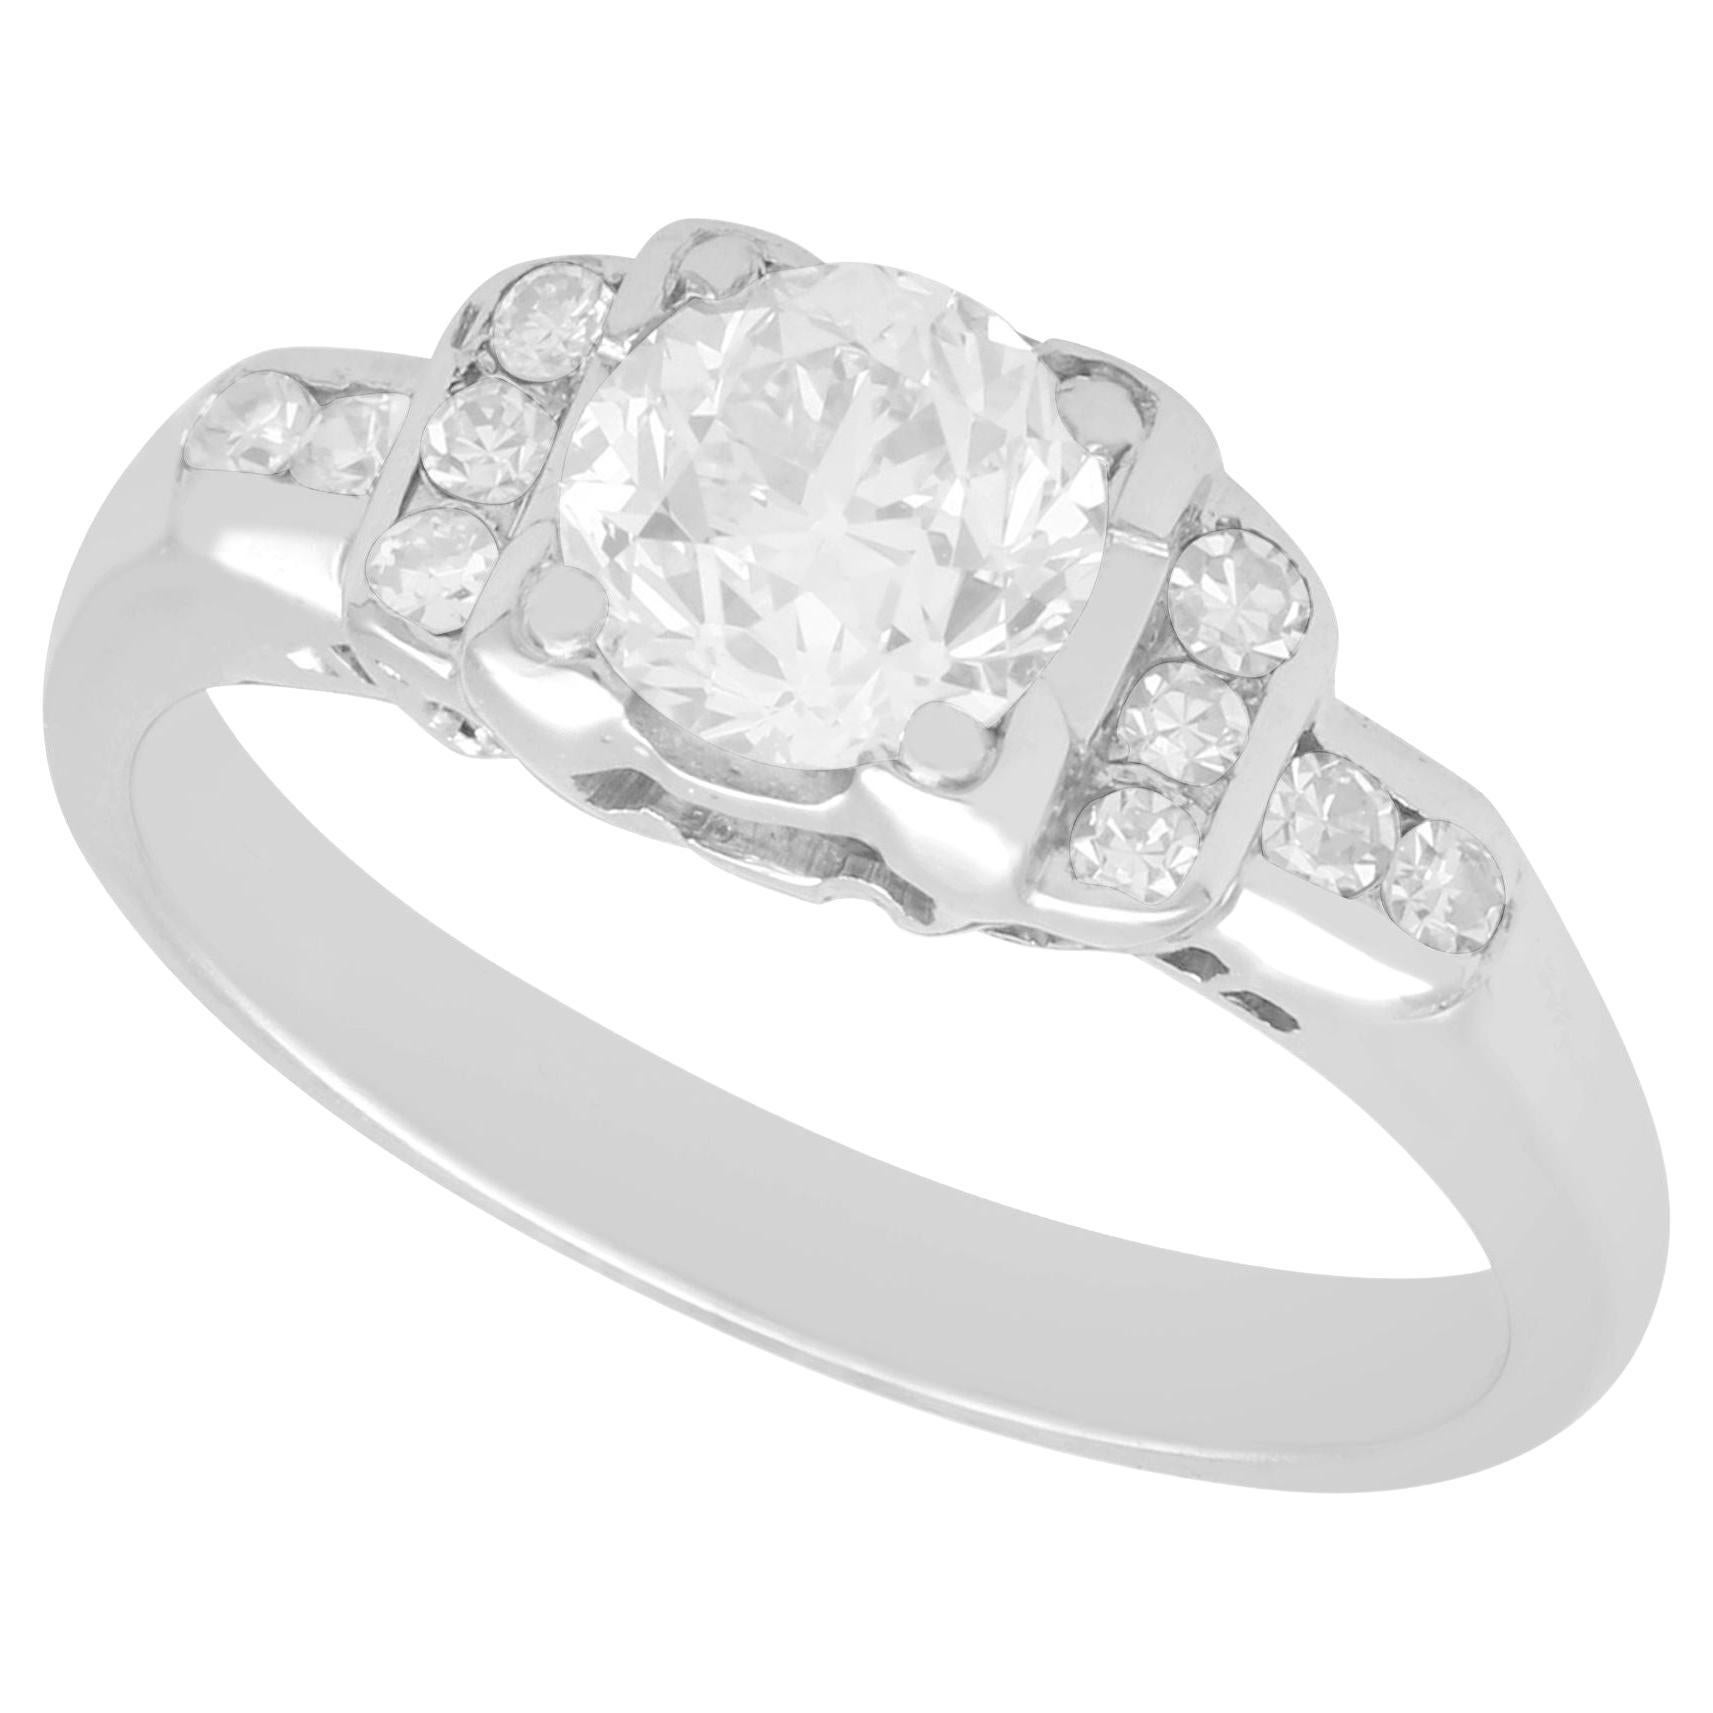 Antique 1.05 Carat Diamond and 14K White Gold Solitaire Ring